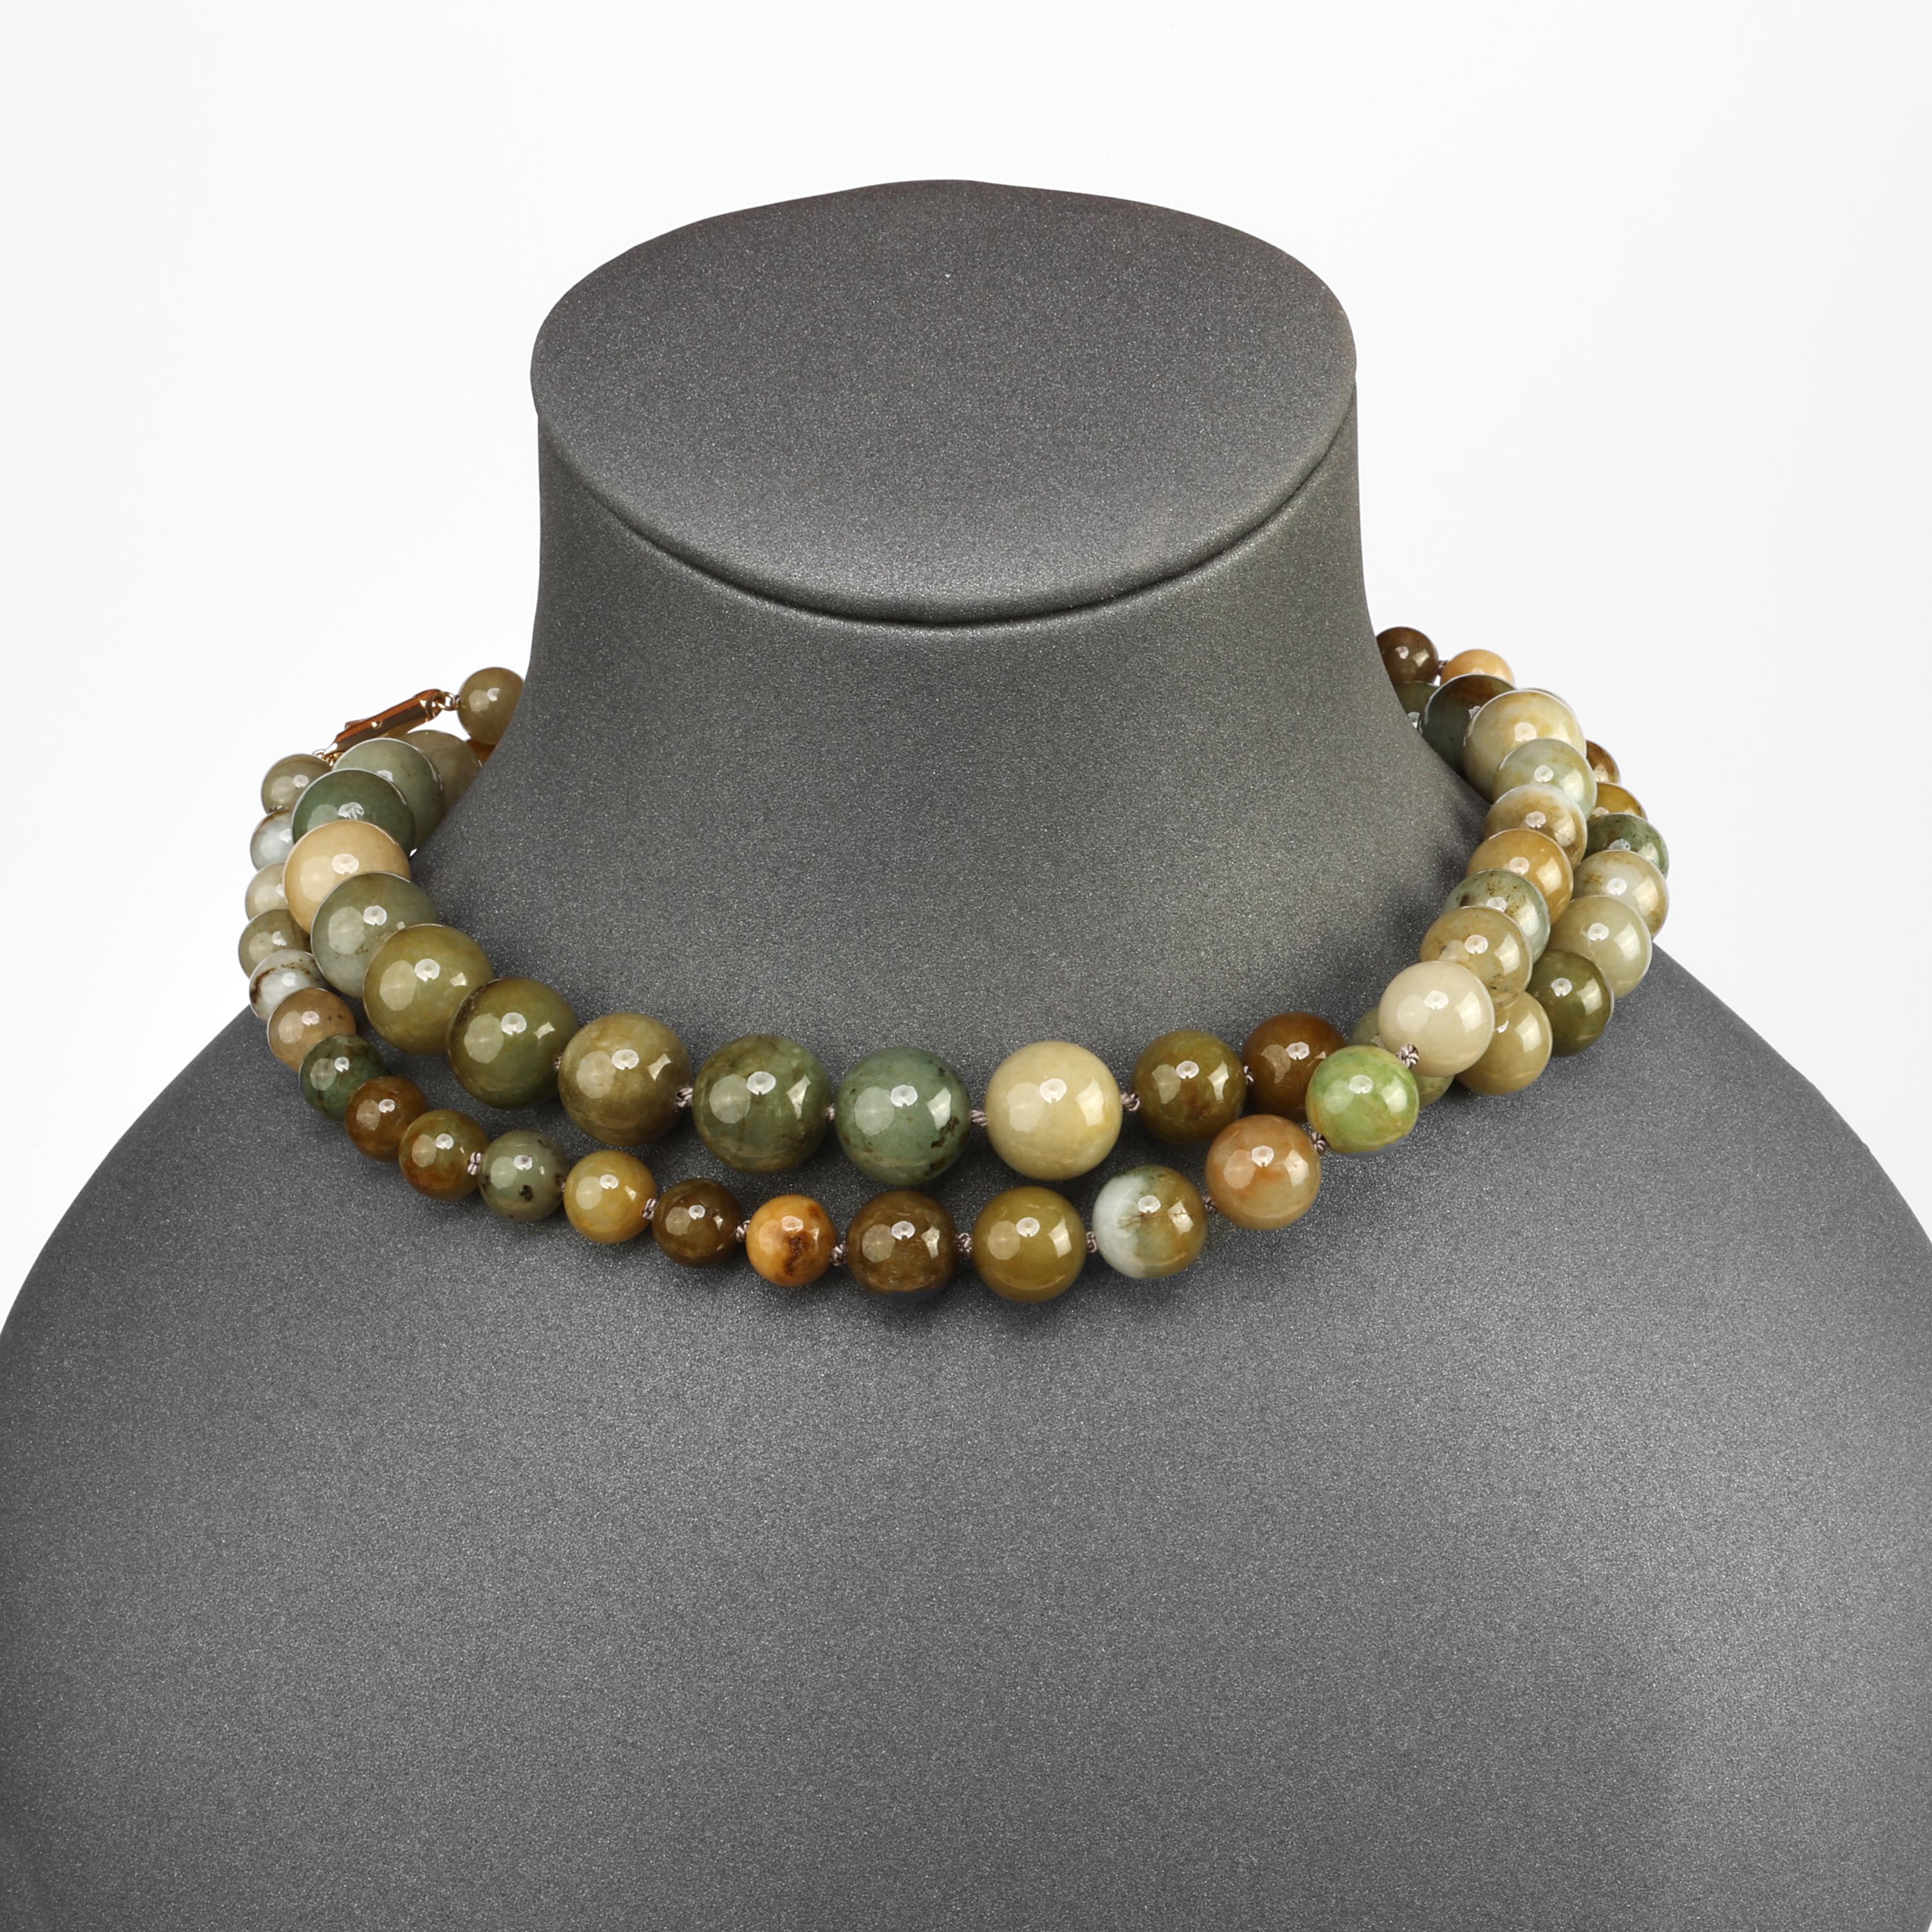 Late fall in New England when the red, orange, yellow, and golden leaves have all fallen from the trees and been raked into piles we are left with a palate not unlike the colors you see in this necklace: bluestone gray, fallen-leaf brown, early